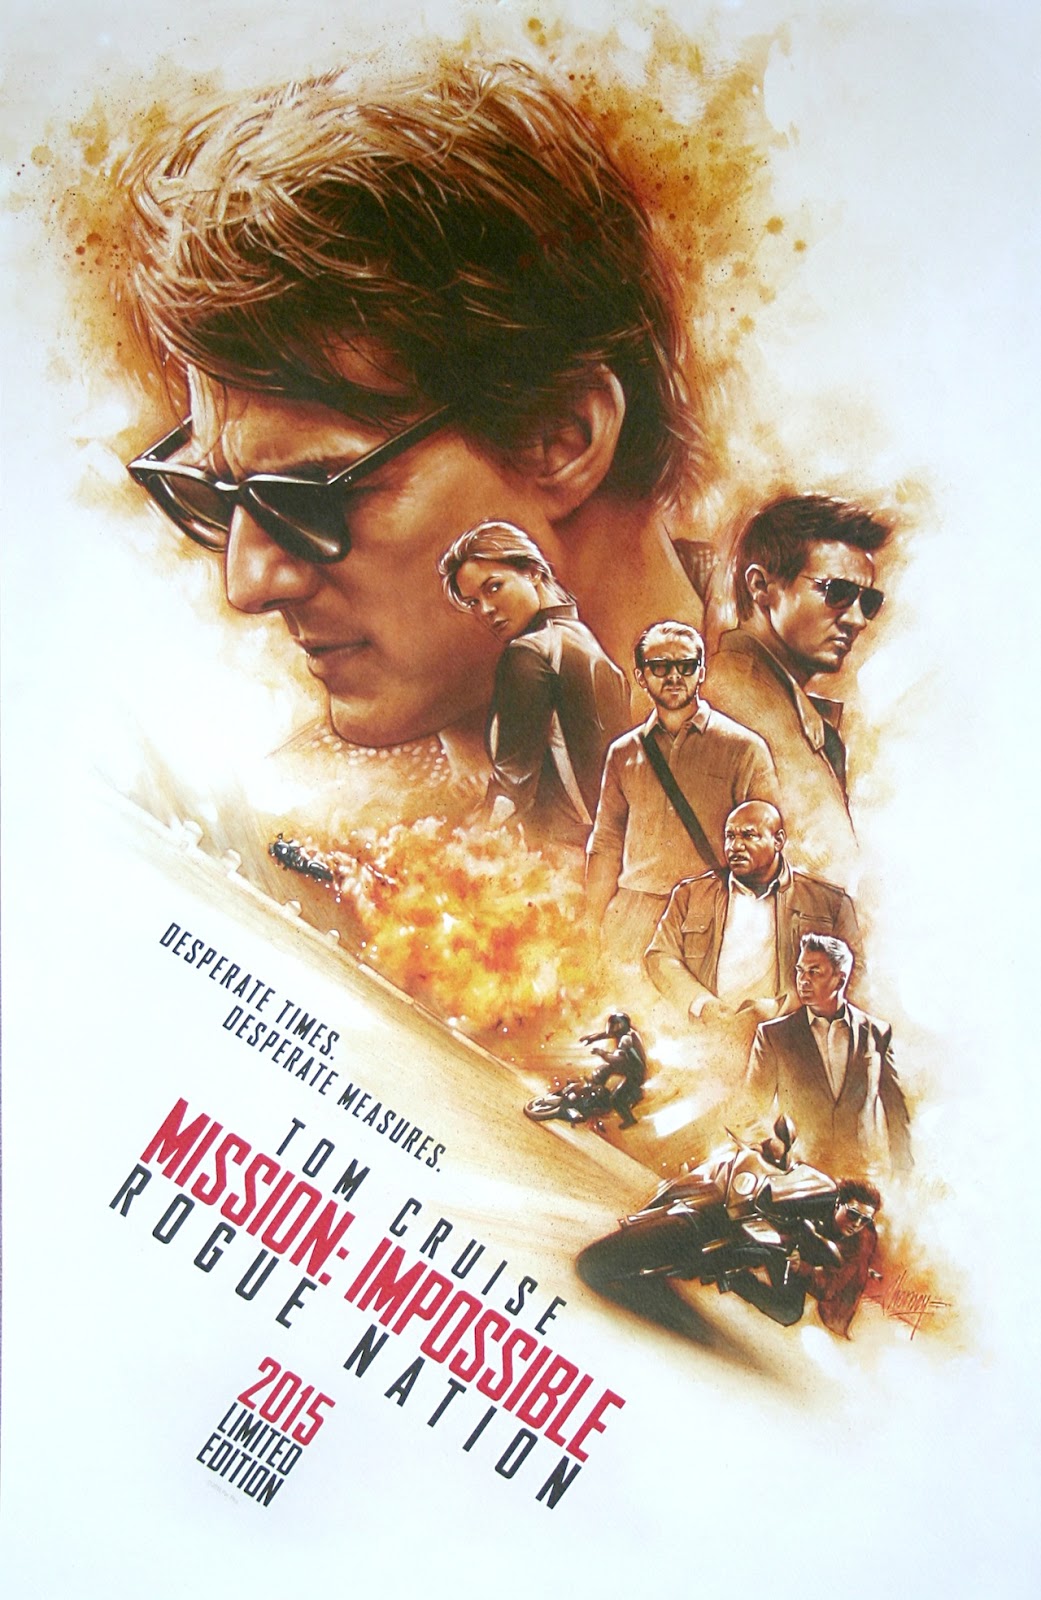 Mission Impossible Rogue Nation 2015 Full Movie Online In Hd Quality